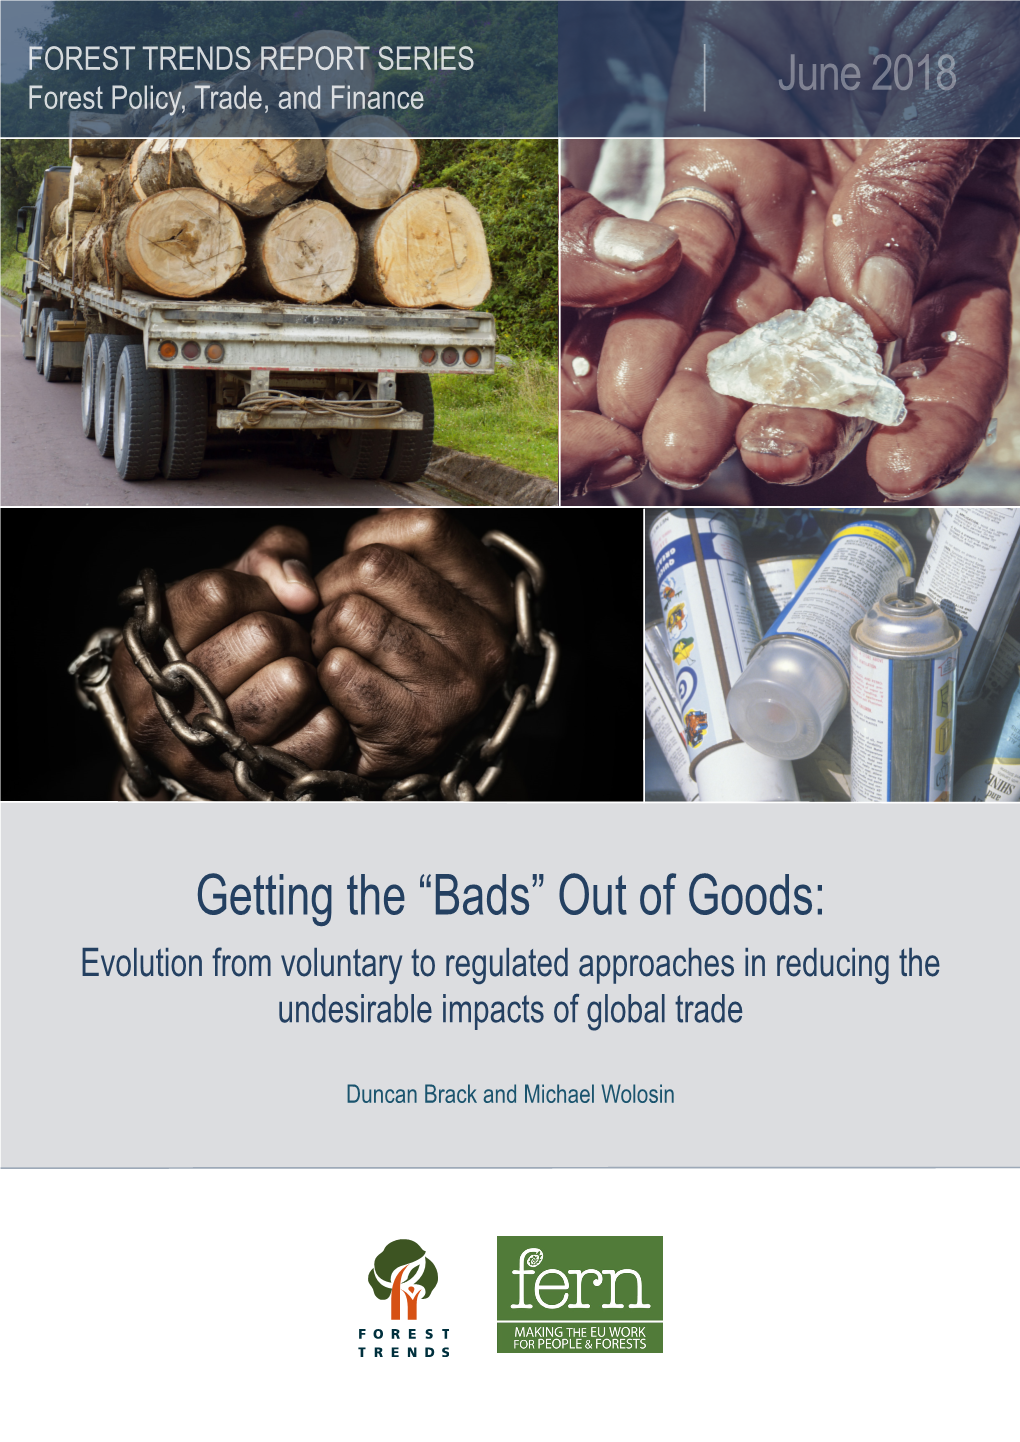 Getting the “Bads” out of Goods: Evolution from Voluntary to Regulated Approaches in Reducing the Undesirable Impacts of Global Trade